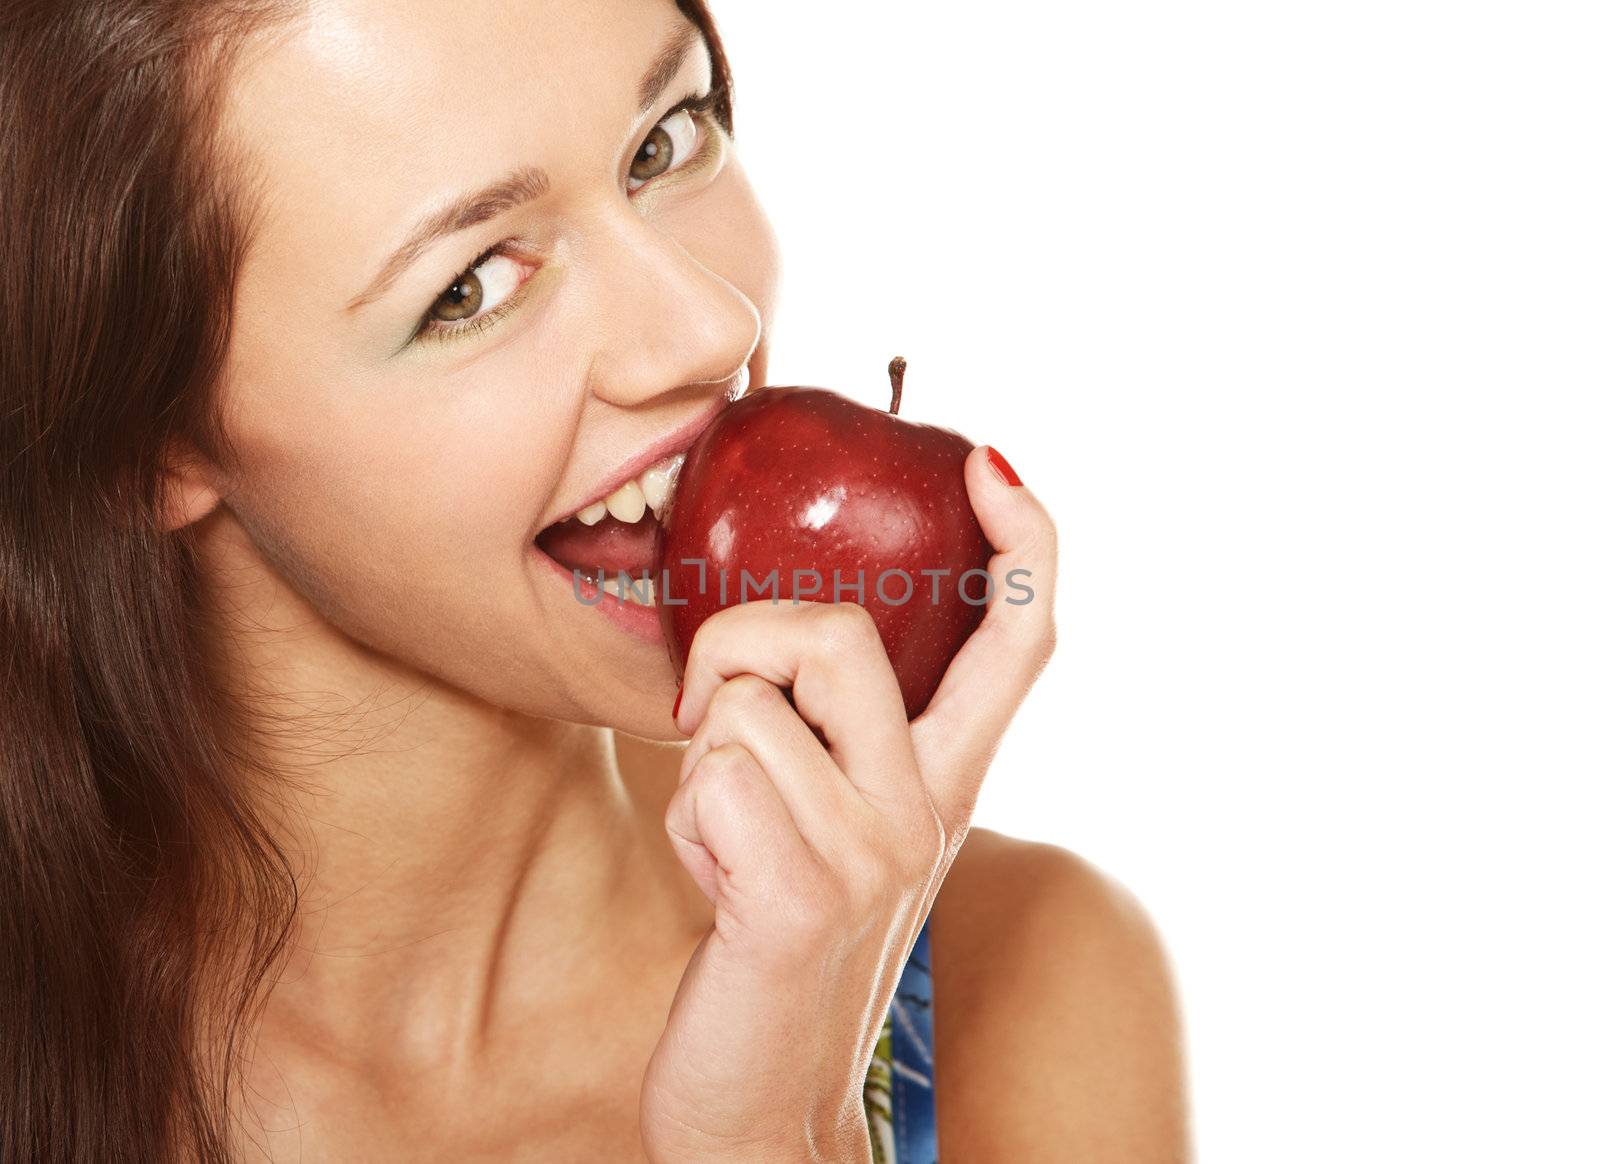 Face of young woman biting the red apple